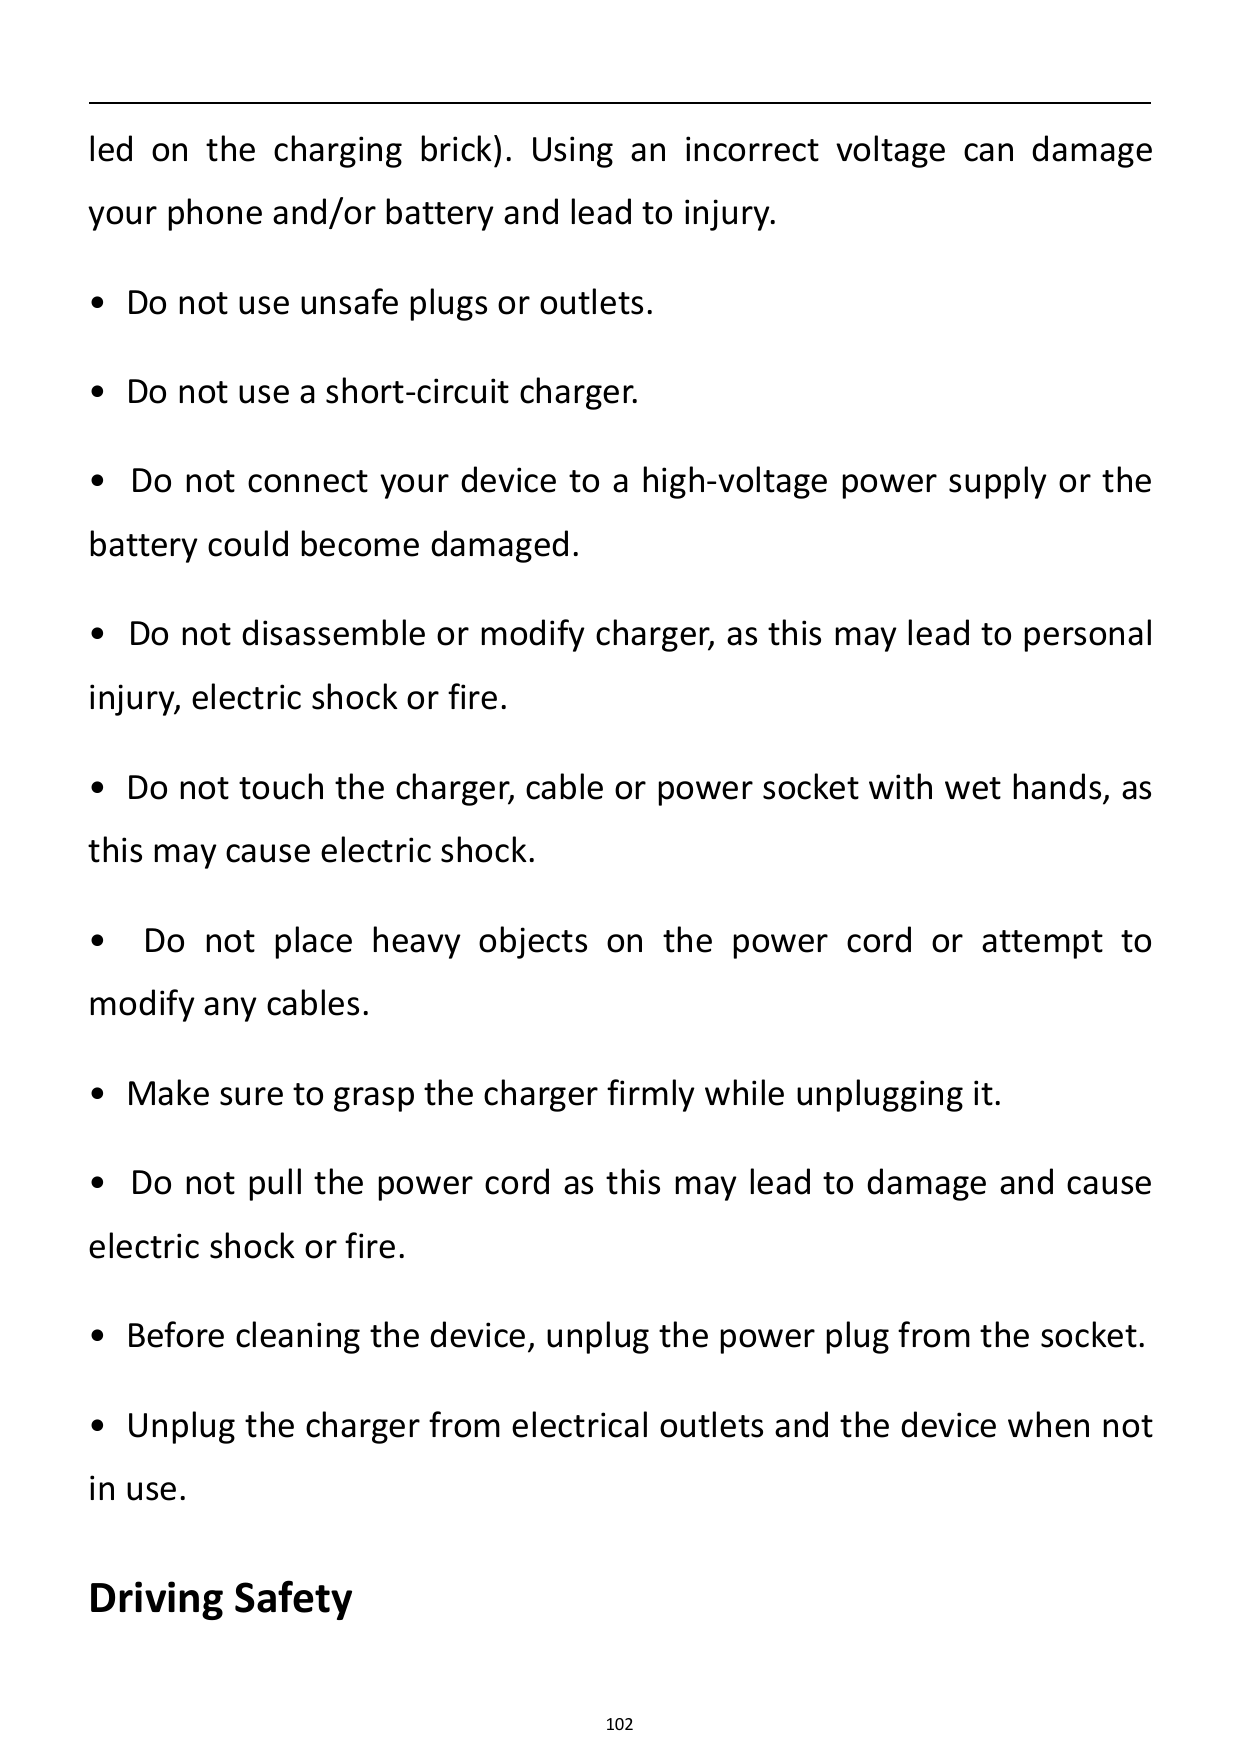 led on the charging brick). Using an incorrect voltage can damageyour phone and/or battery and lead to injury.• Do not use unsaf